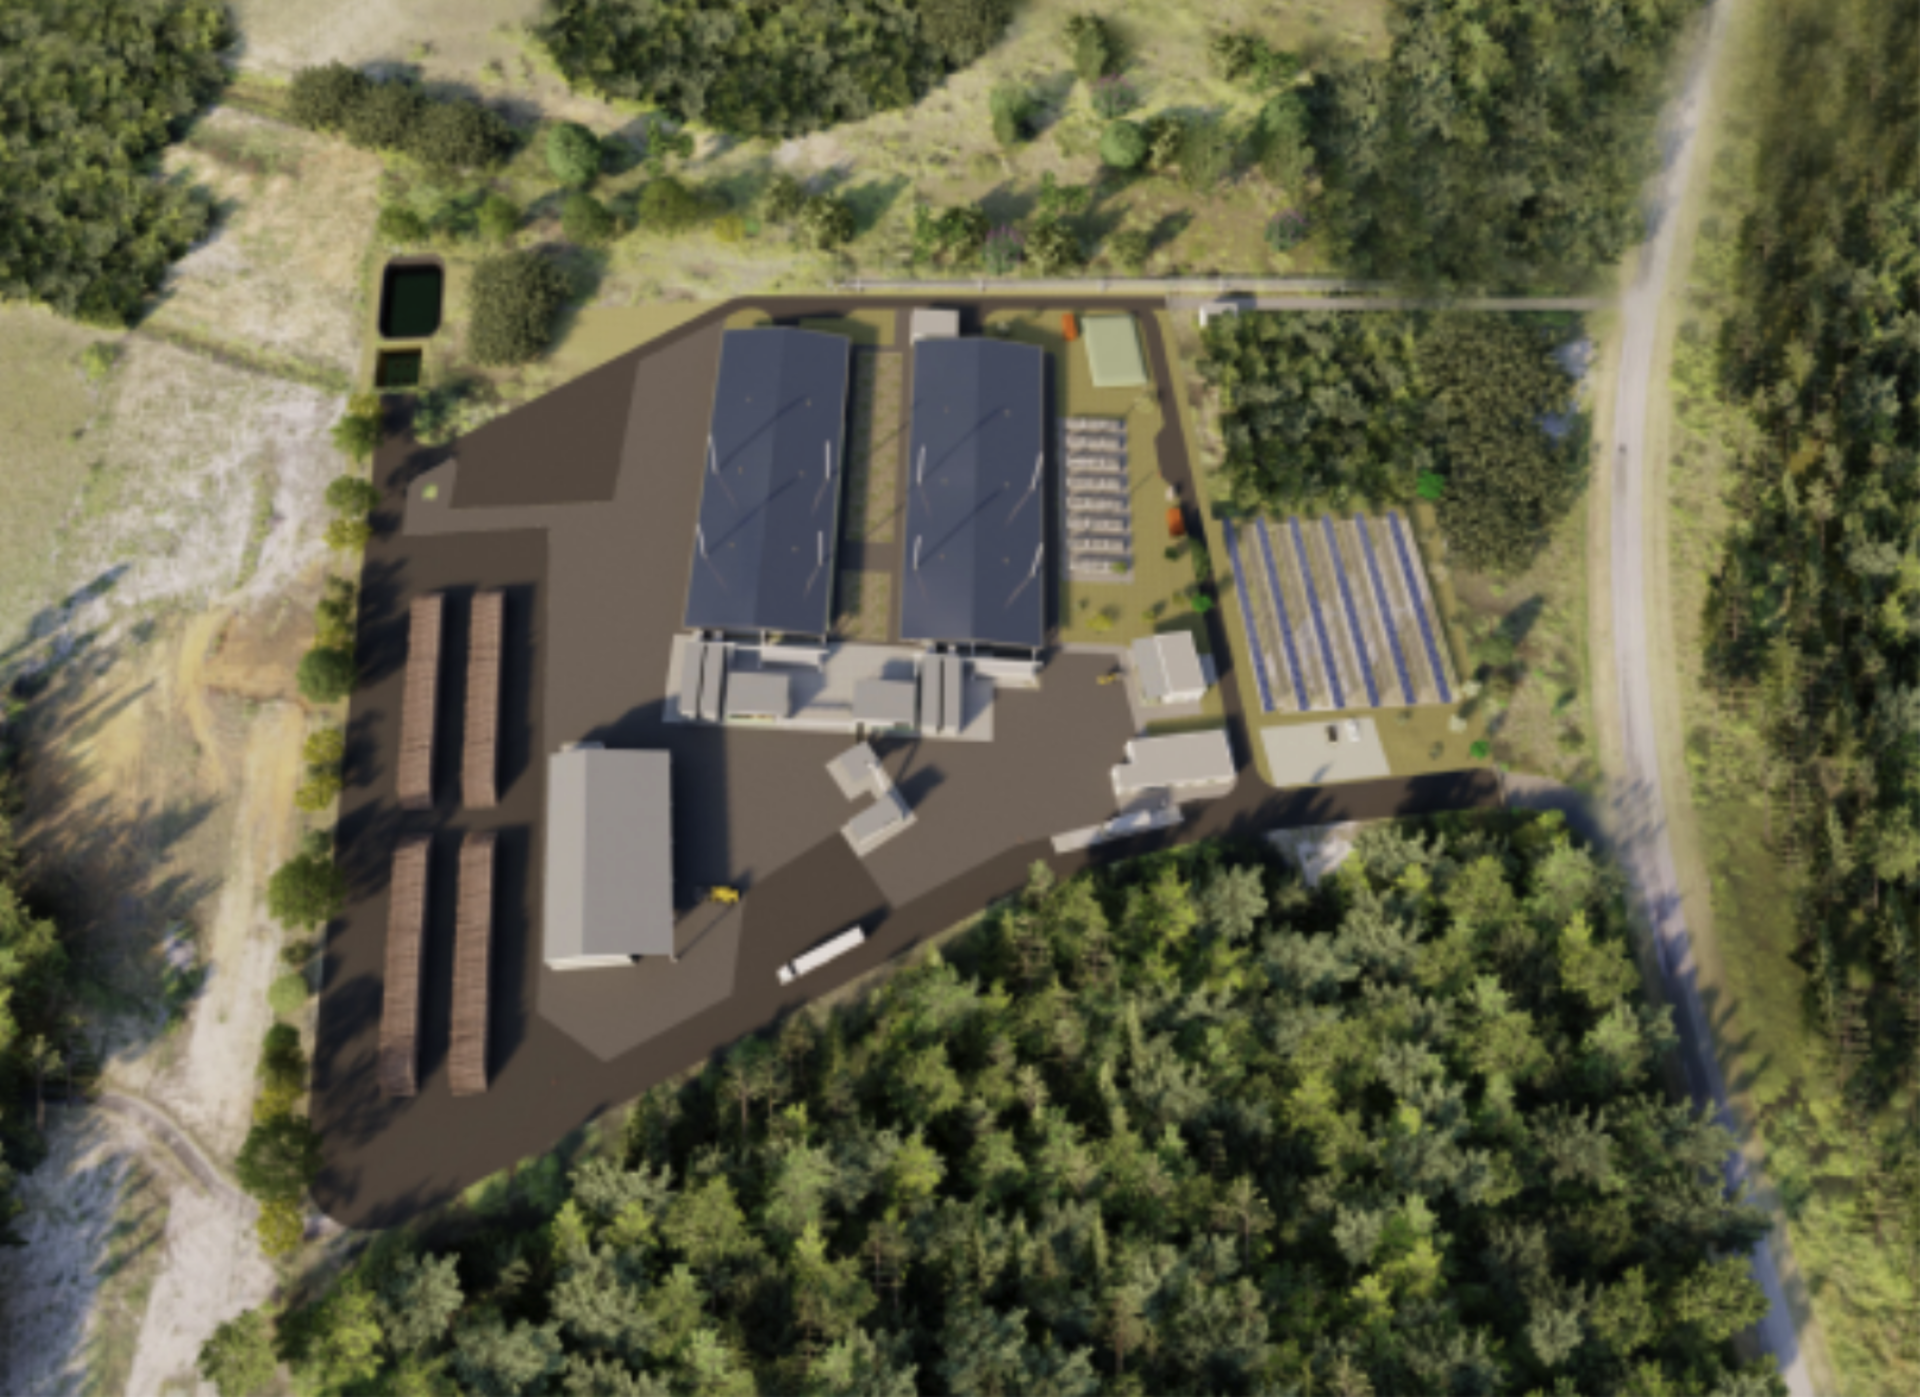 Biomass plant planned at Europe's Spaceport